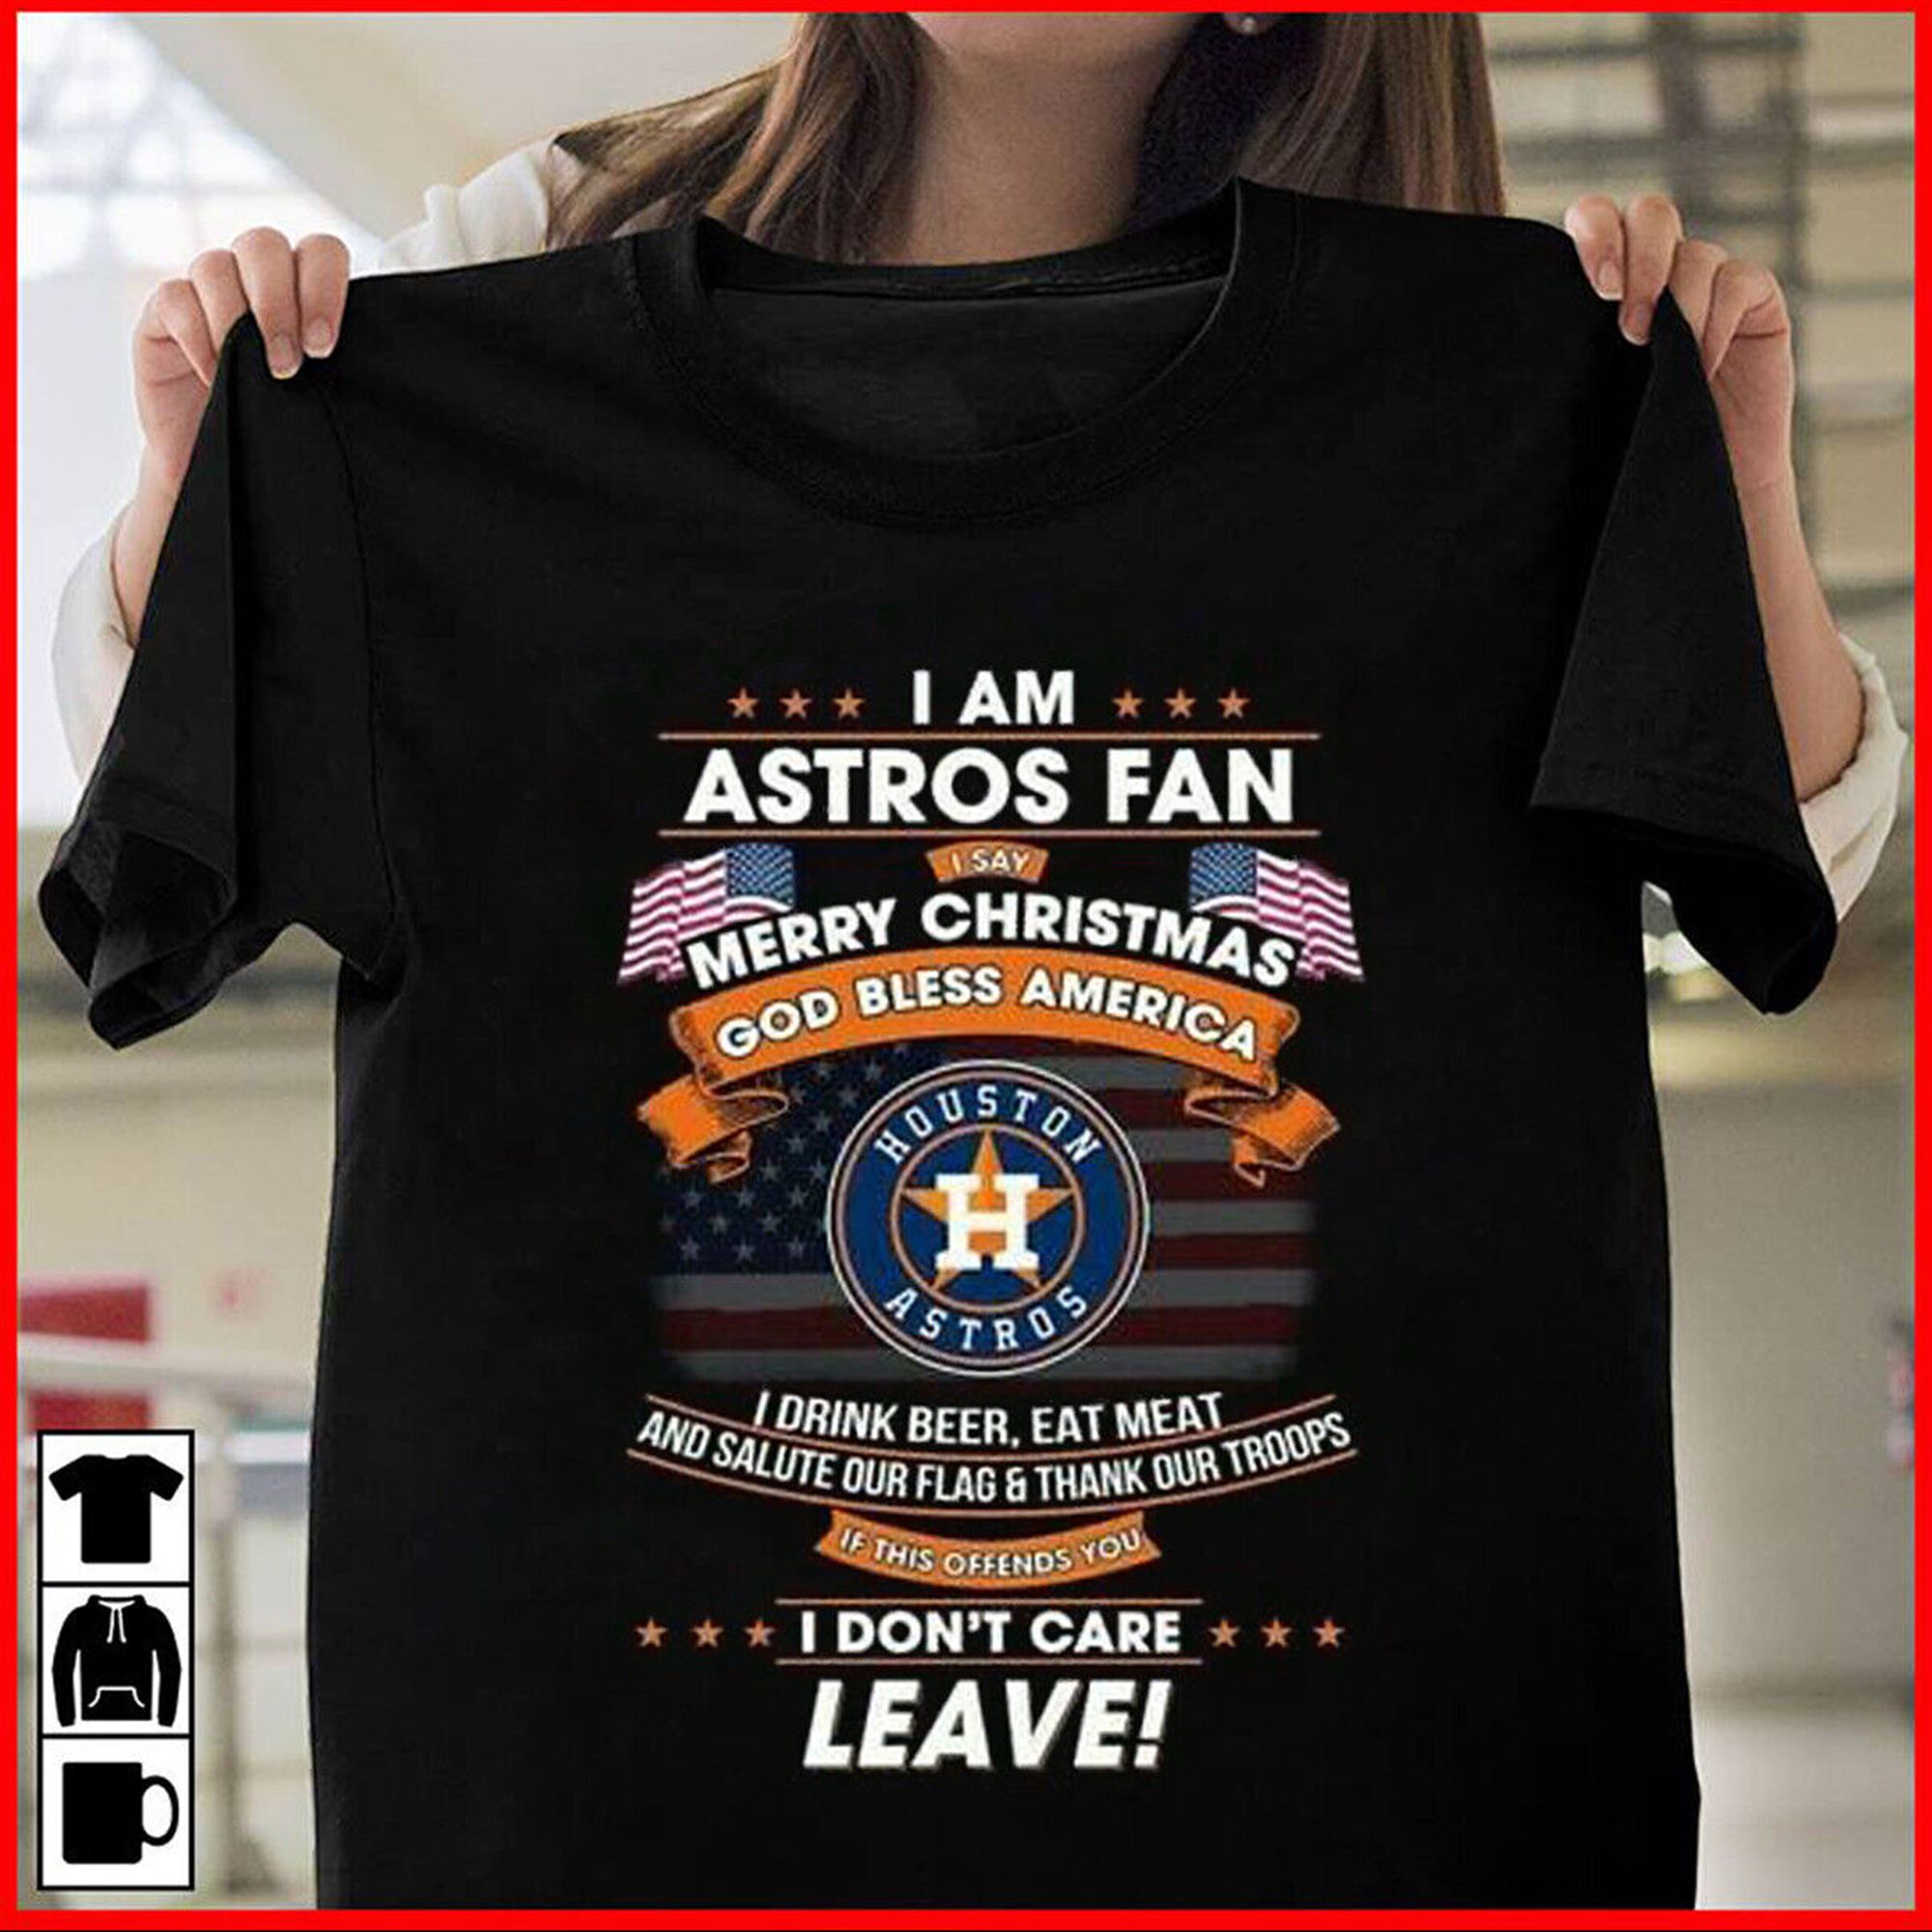 Houston Astros T-shirt Baseball Mlb Team Sport Funny Navy Cotton Tee Gift Fans Size Up To 5xl